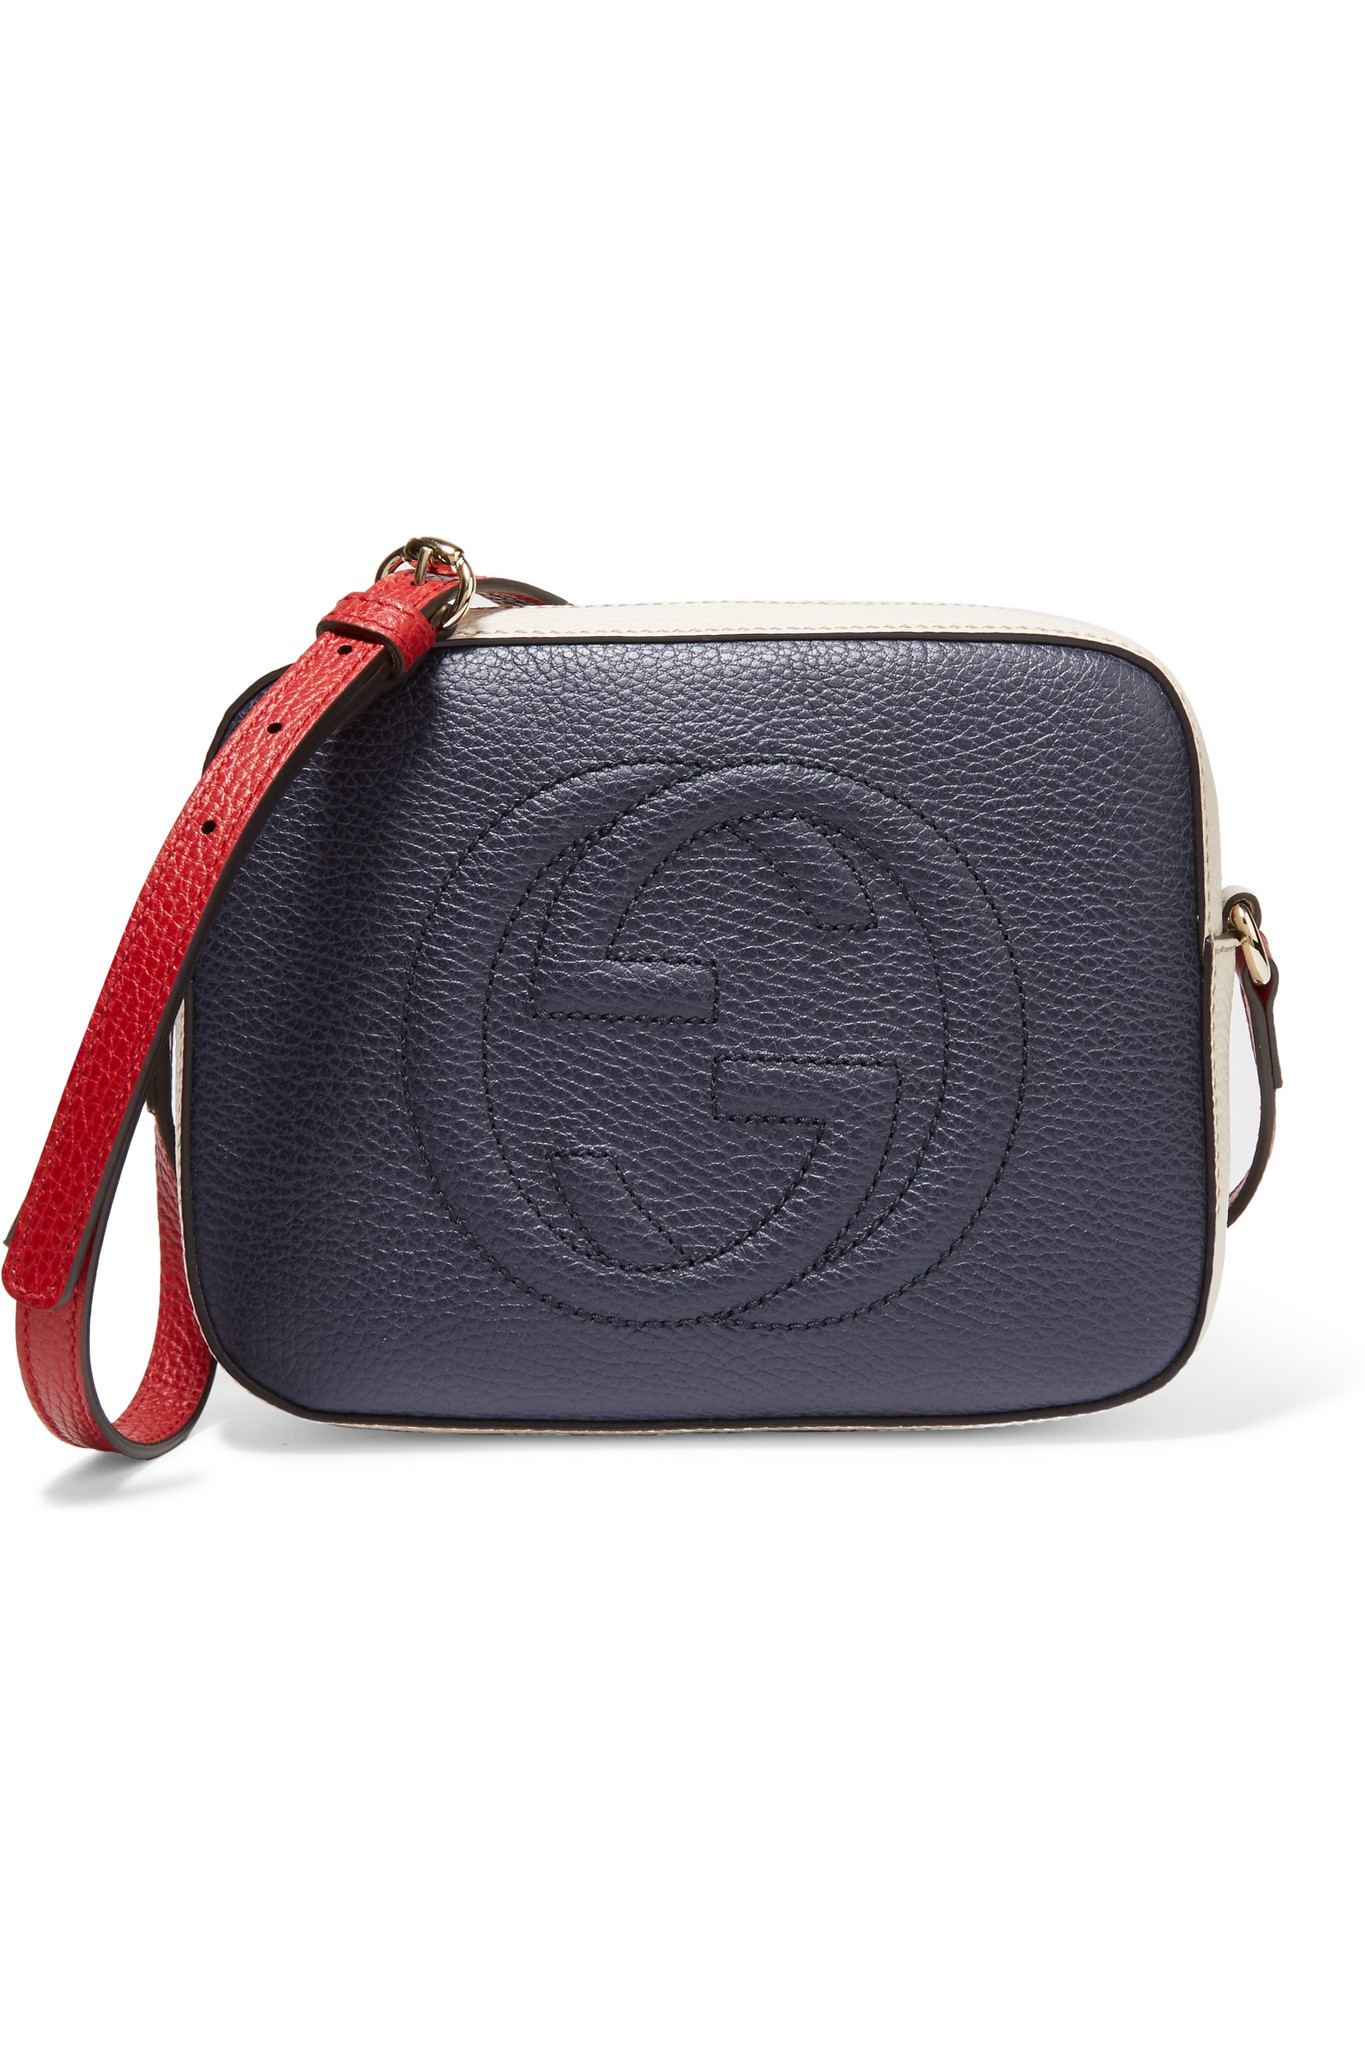 Lyst - Gucci Soho Disco Color-block Textured-leather Shoulder Bag in Blue